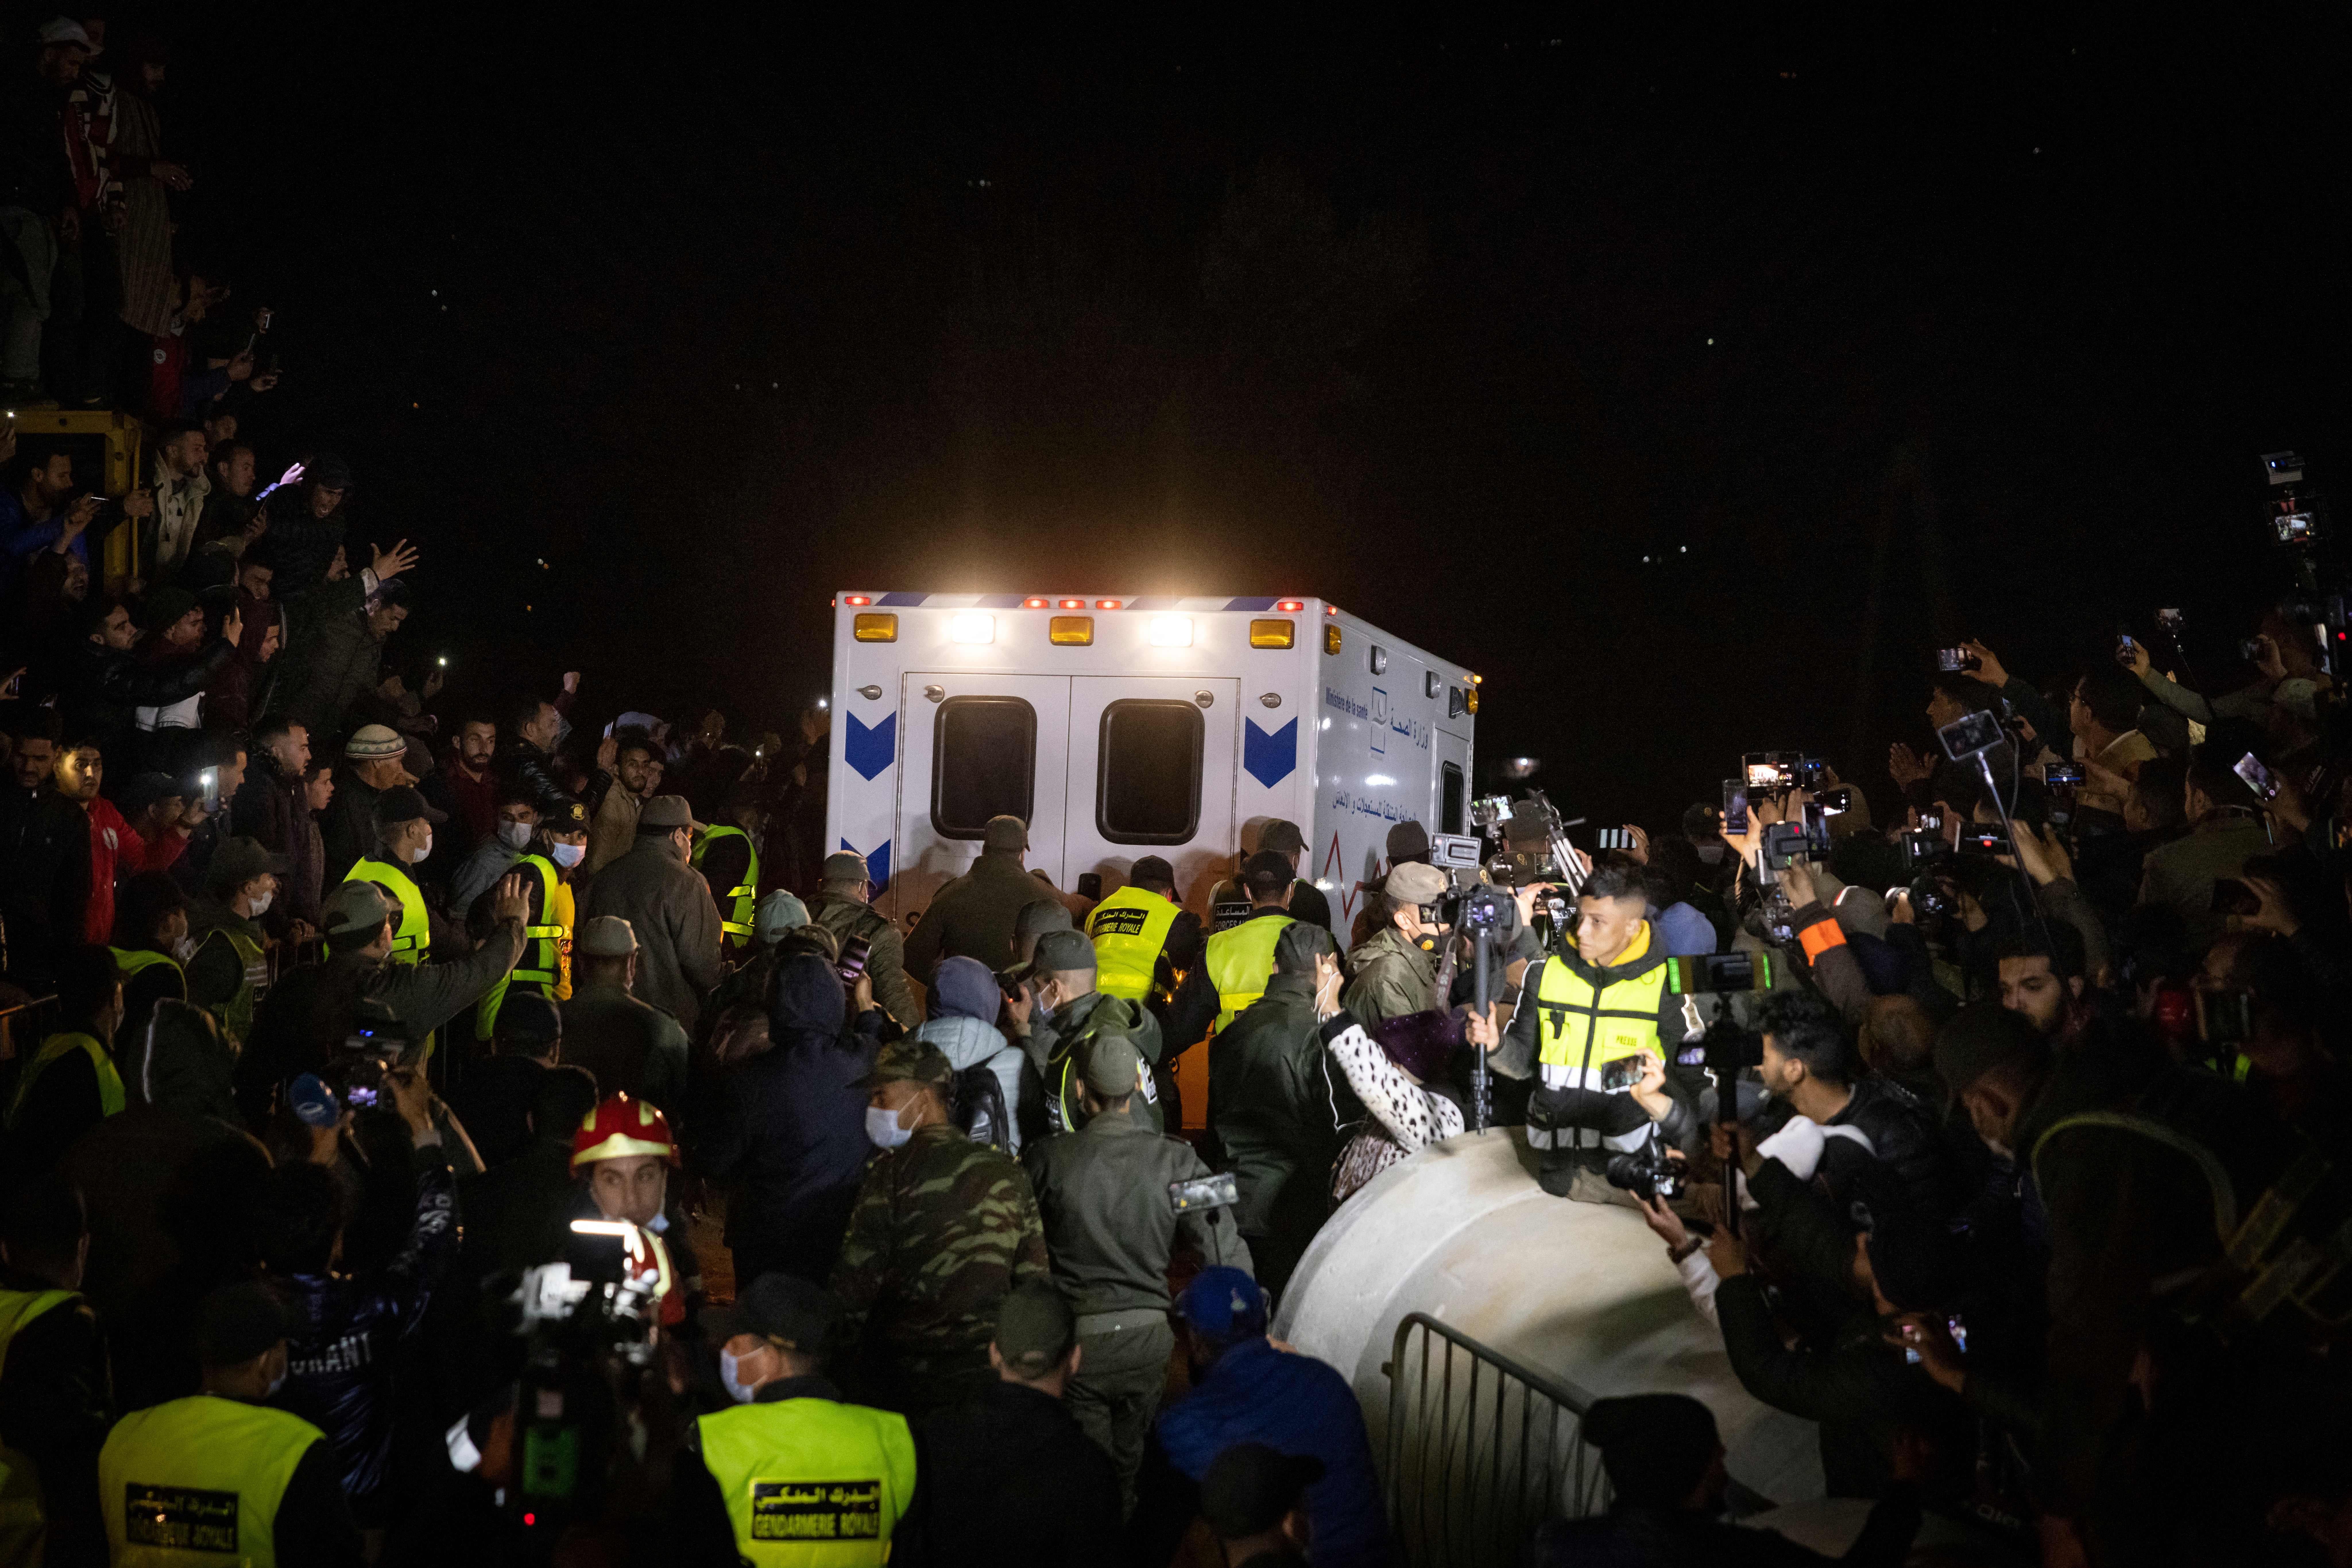 People look on as an ambulance drives away from the scene where rescue crews worked to pull five-year-old Rayan Oram from a well shaft he fell into on February 1, in the remote village of Ighrane in the rural northern province of Chefchaouen on February 5, 2022.